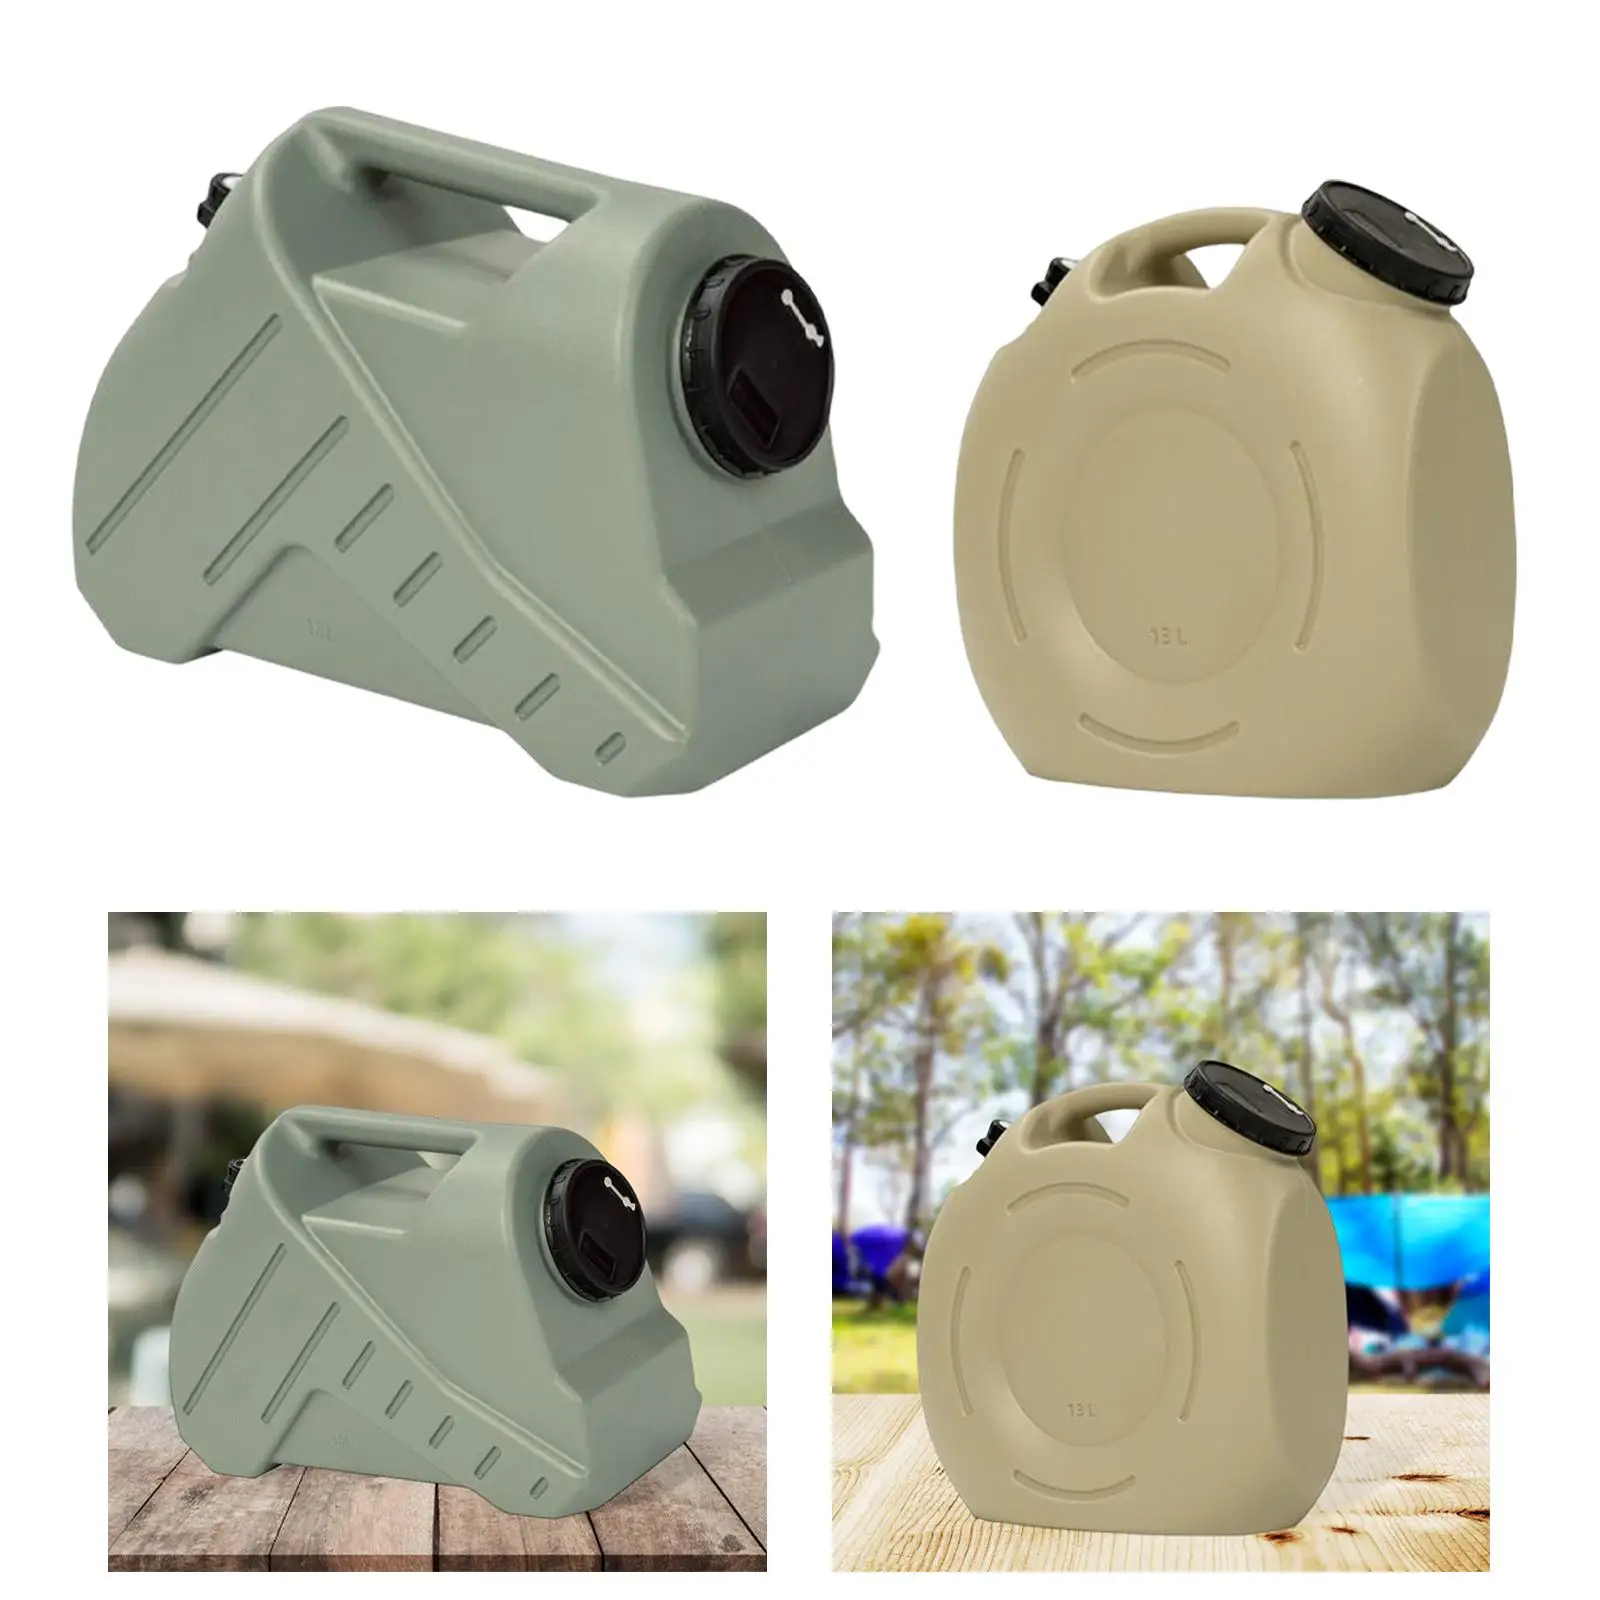 

Portable Water Storage Carrier with Spigot Drink Dispenser Water Jug Canister Bottle for Tourism Outside Activities Hiking BBQ